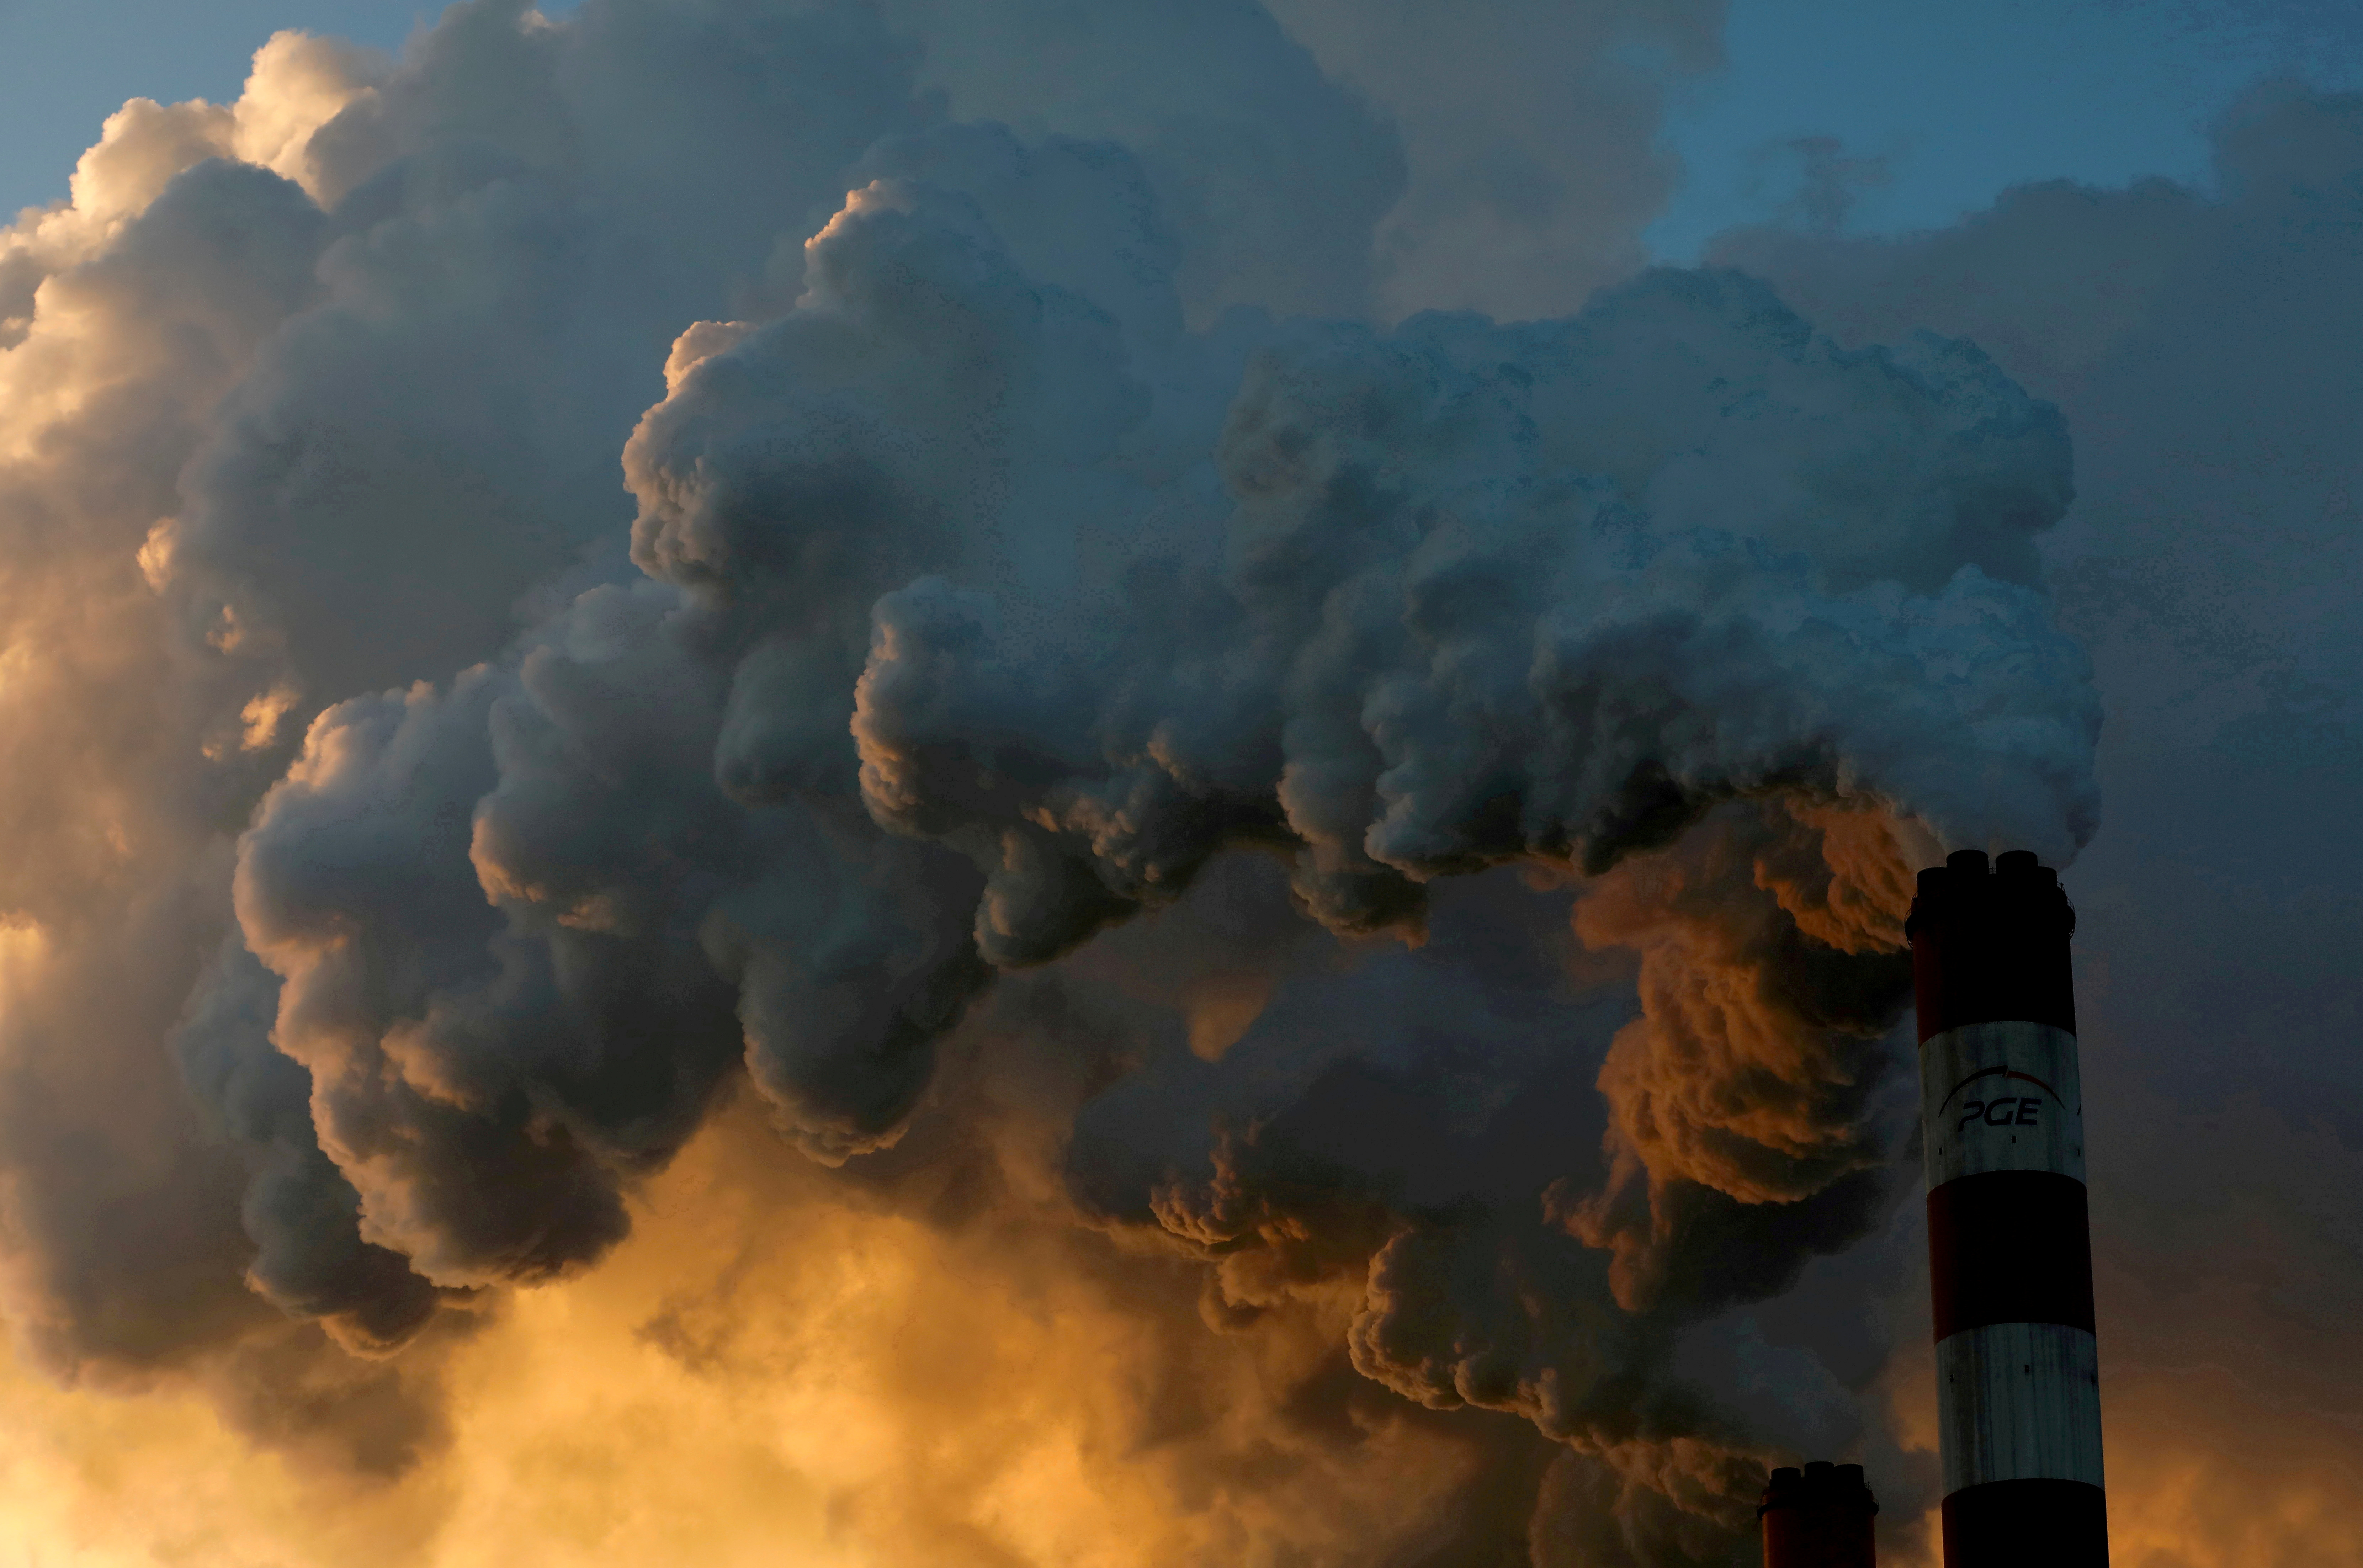 Smoke and steam billow from Poland's Belchatow Power Station, Europe's largest coal-fired power plant